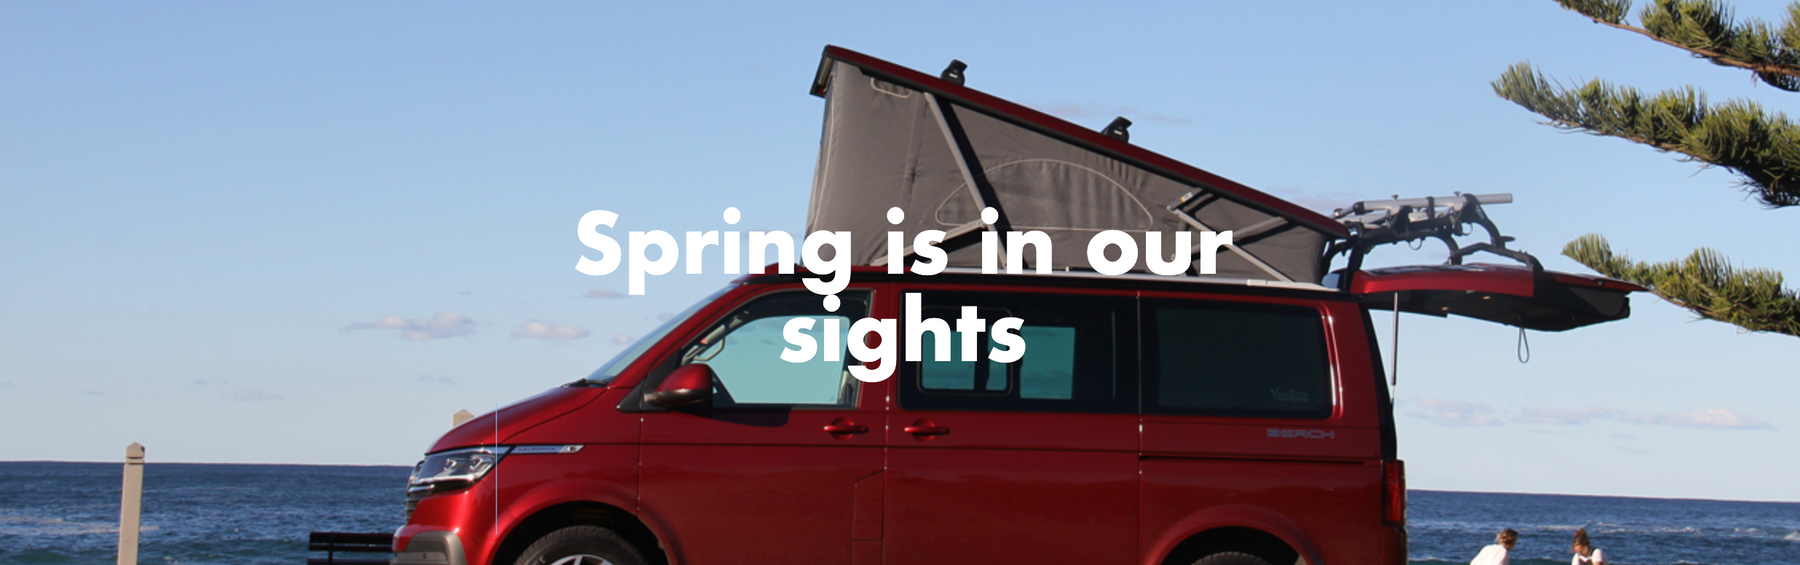 Spring is in our sights